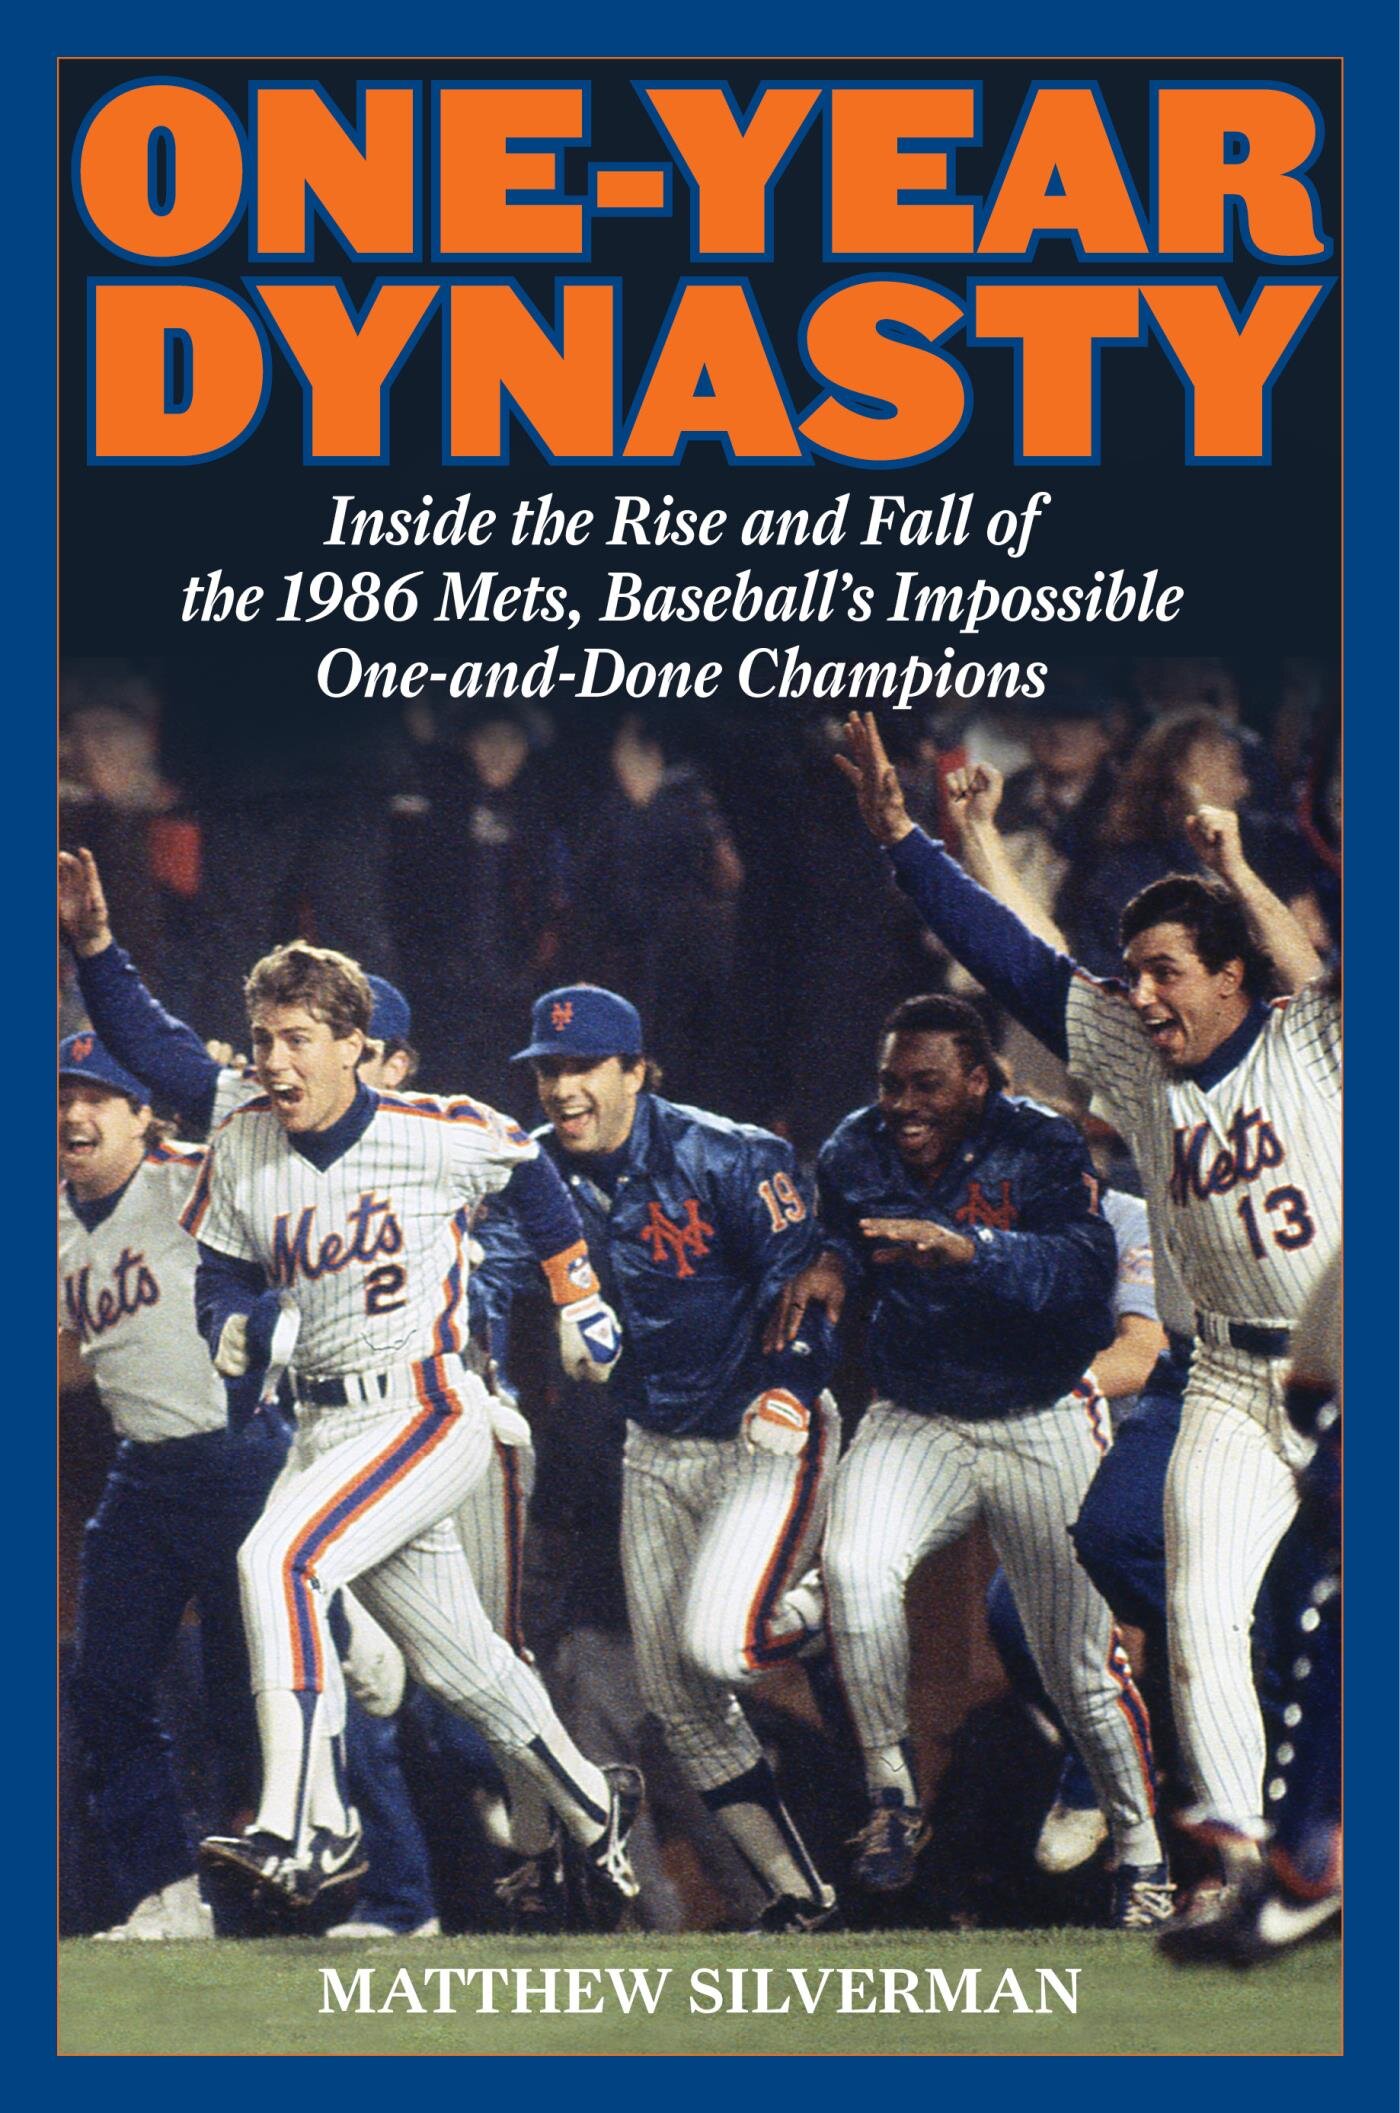 One-Year Dynasty: Inside the Rise and Fall of the 1986 Mets, Baseball's Impossible One-and-Done Champions [eBook]